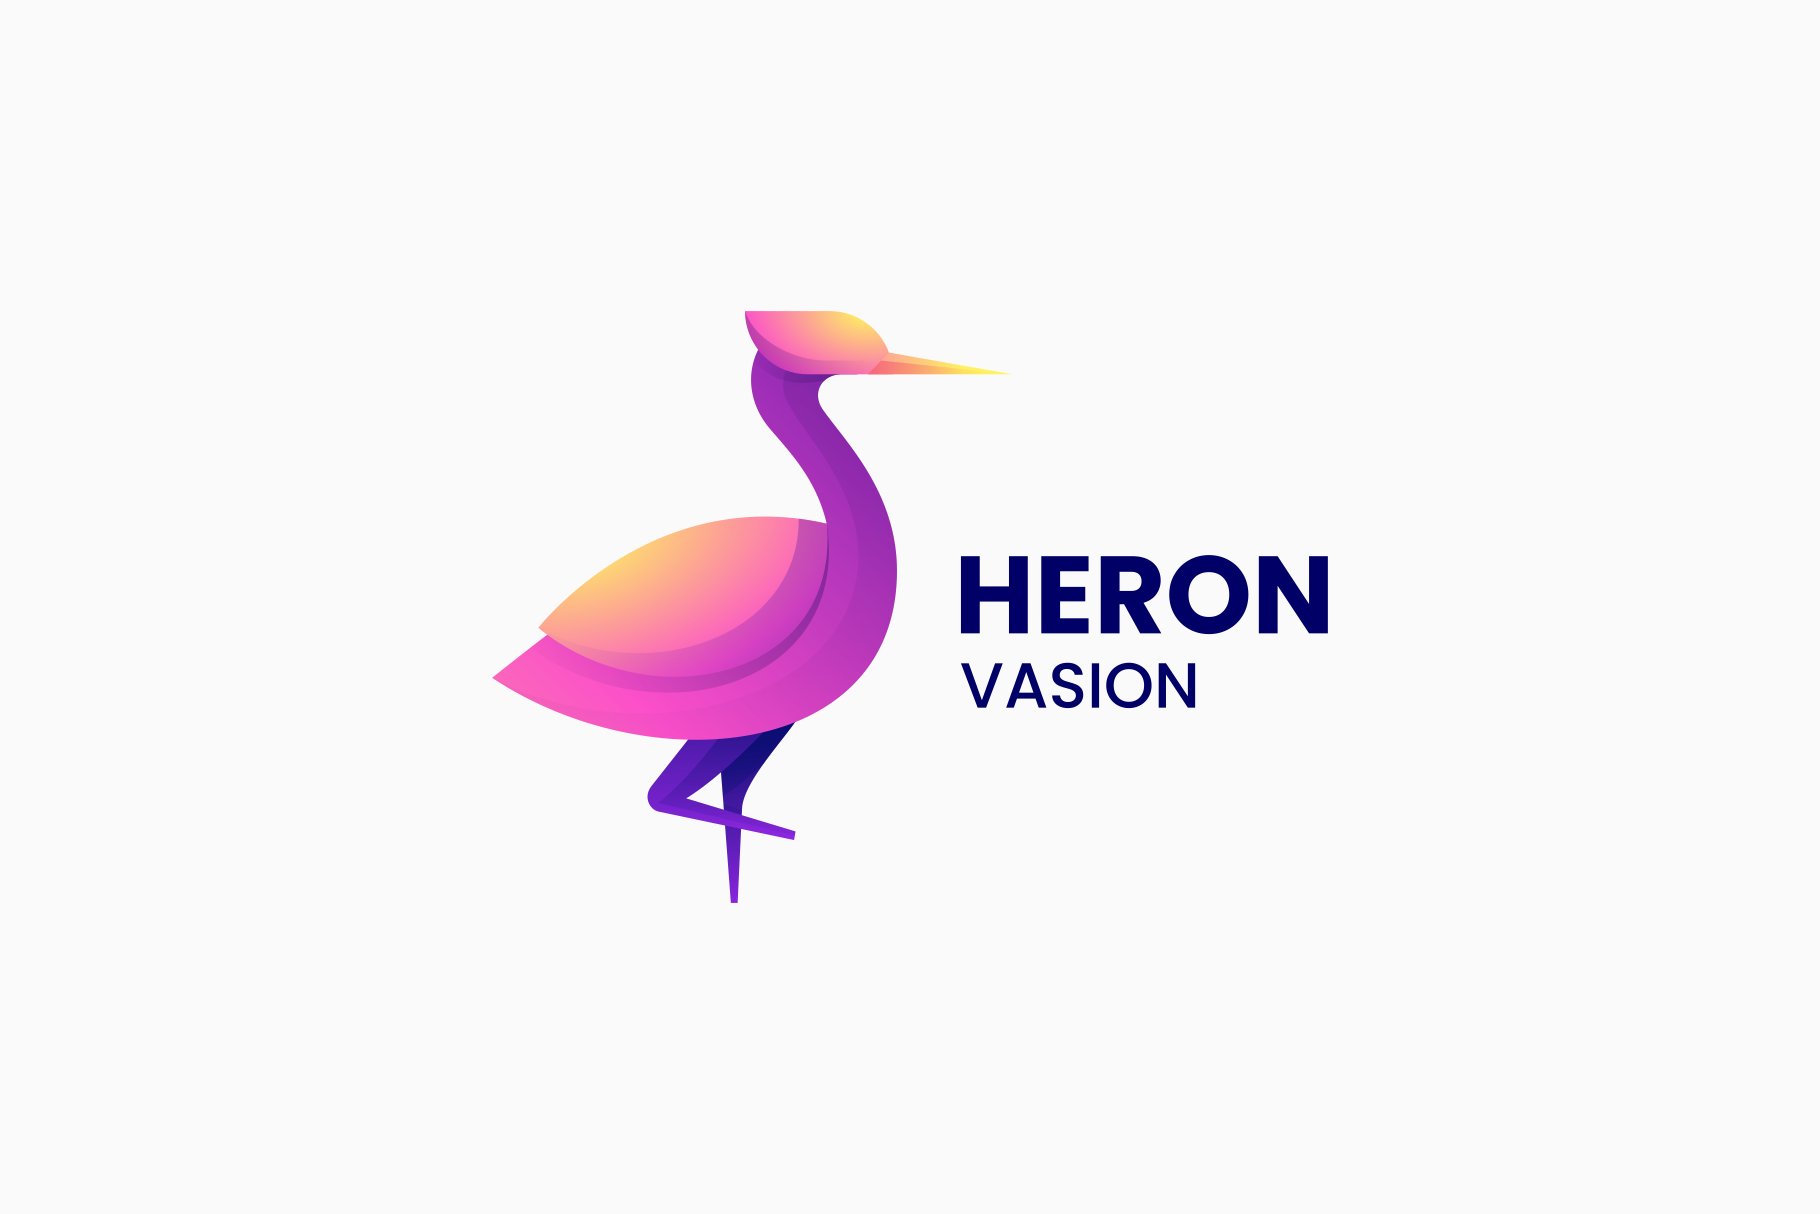 Heron Gradient Colorful Logo cover image.